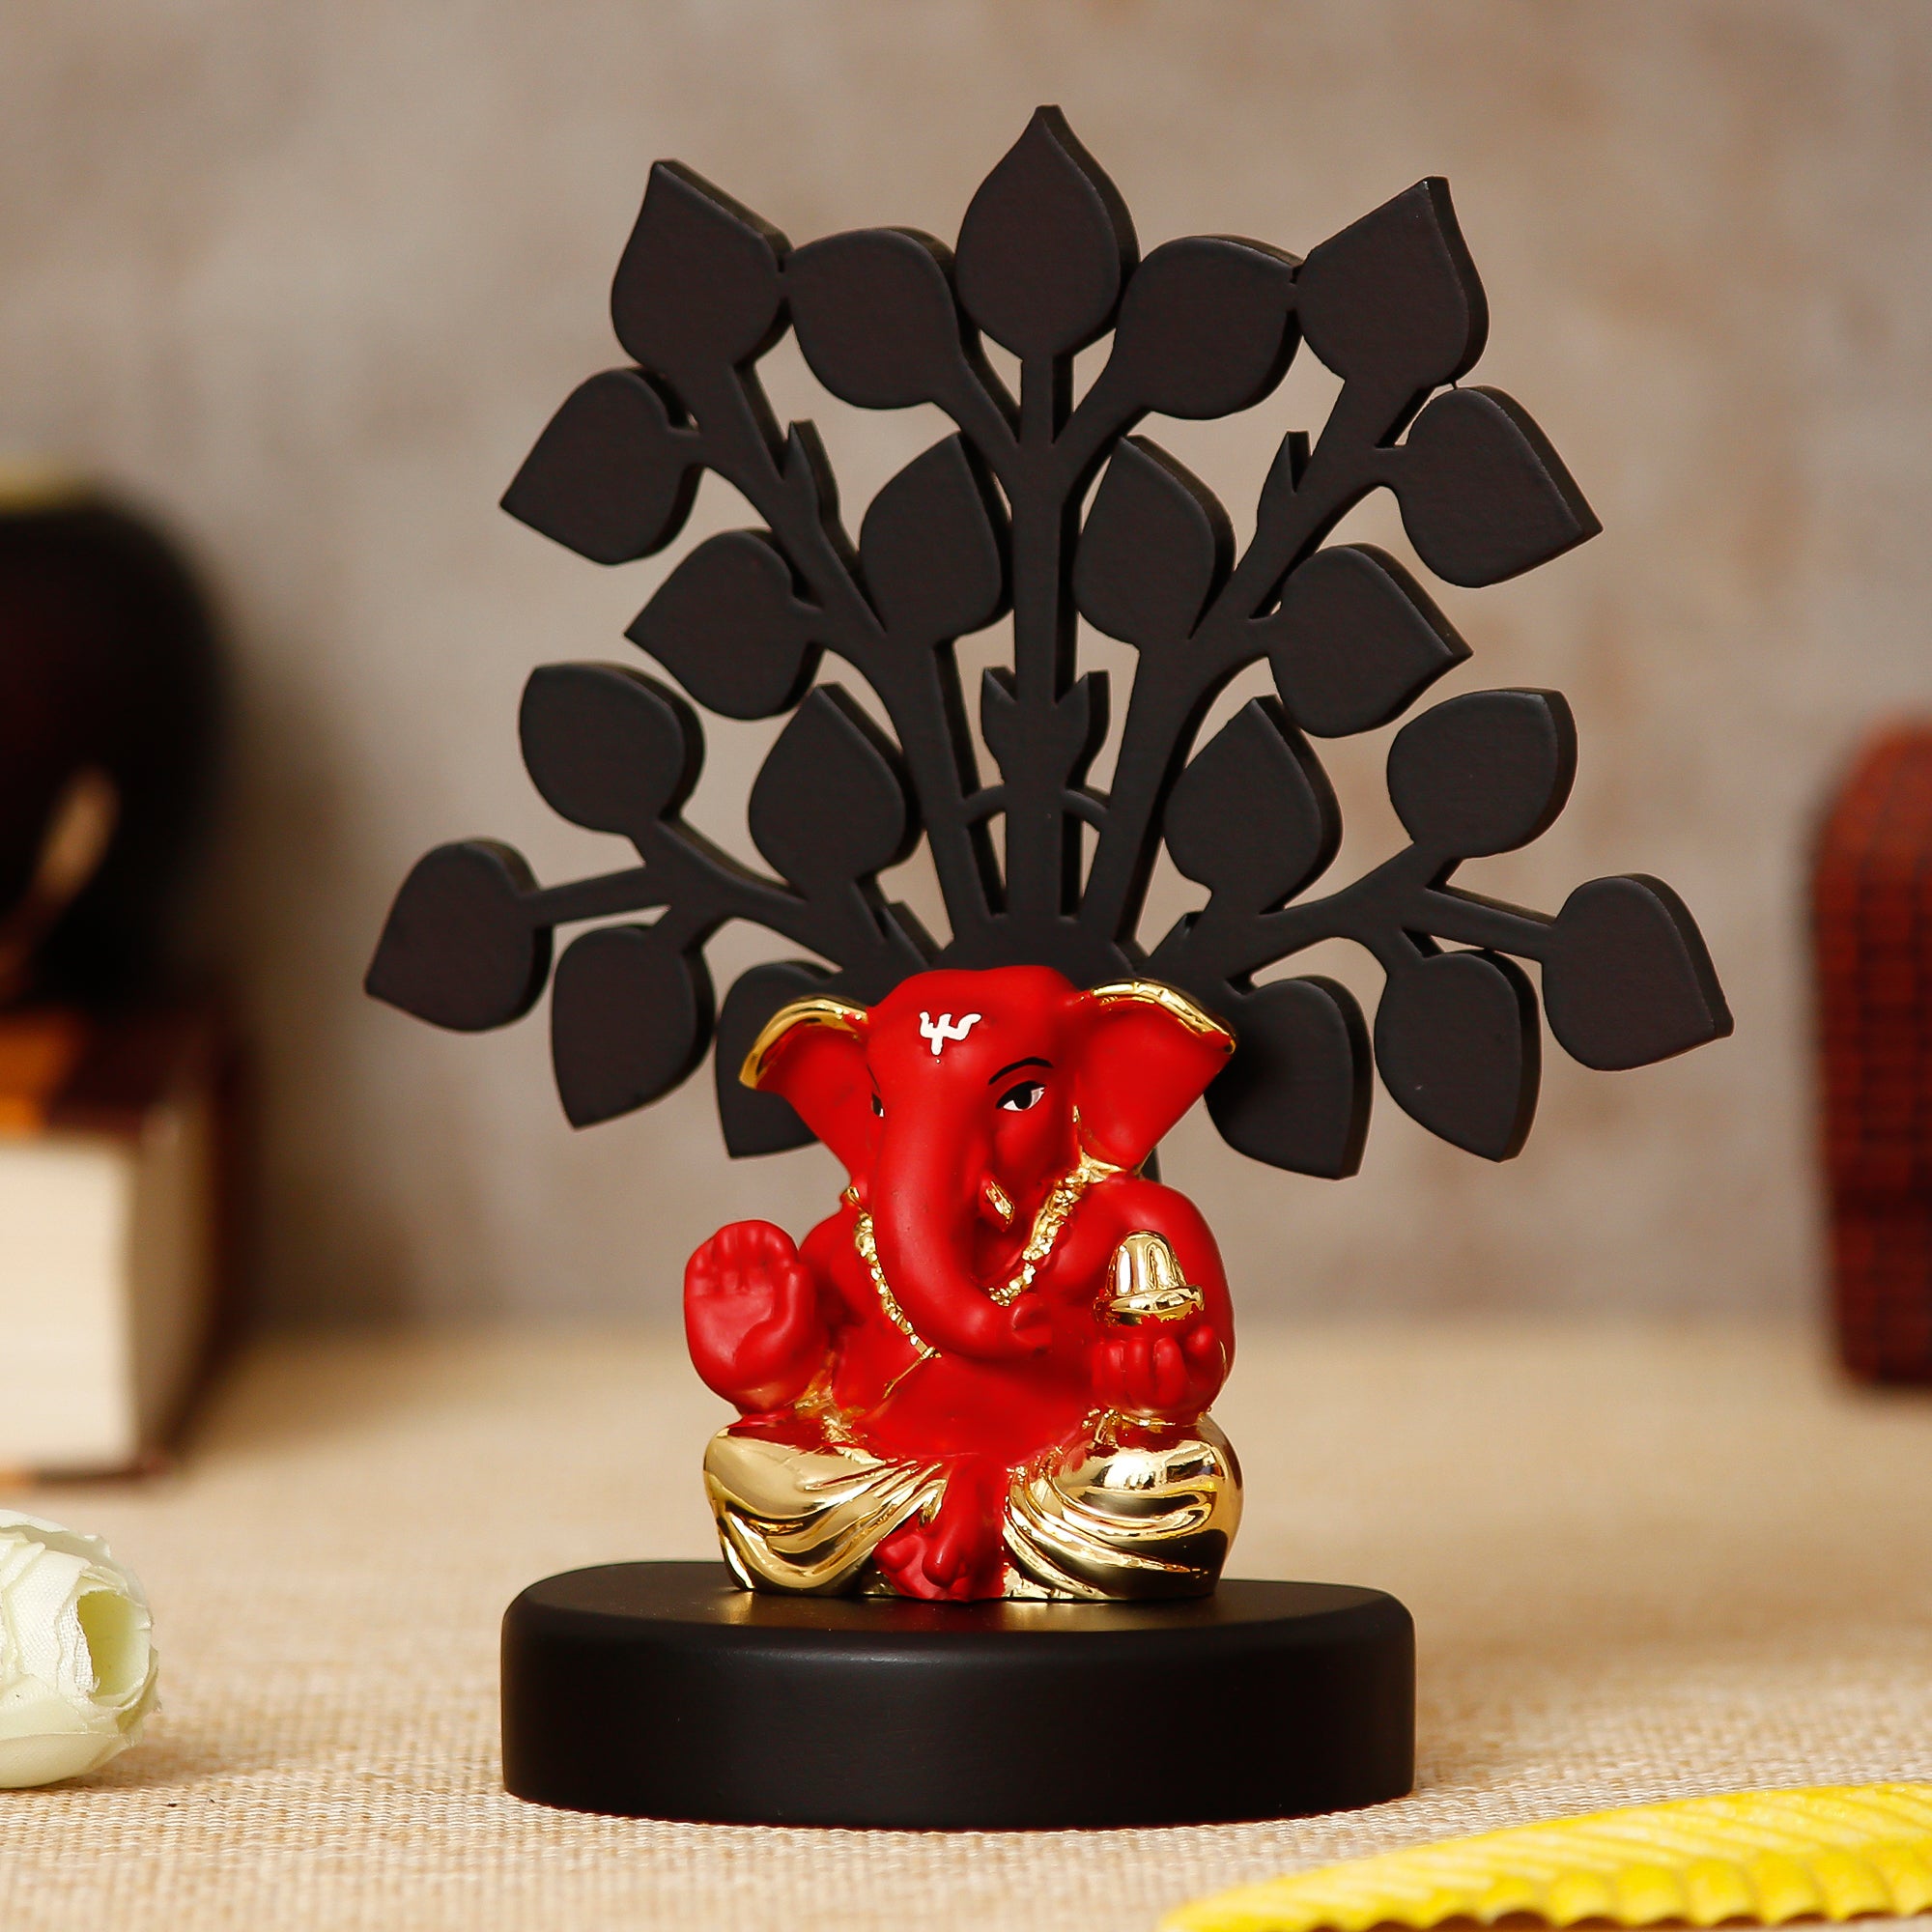 eCraftIndia Gold Plated Red Ganesha Decorative Showpiece with Wooden Tree for Home/Temple/Office/Car Dashboard 2